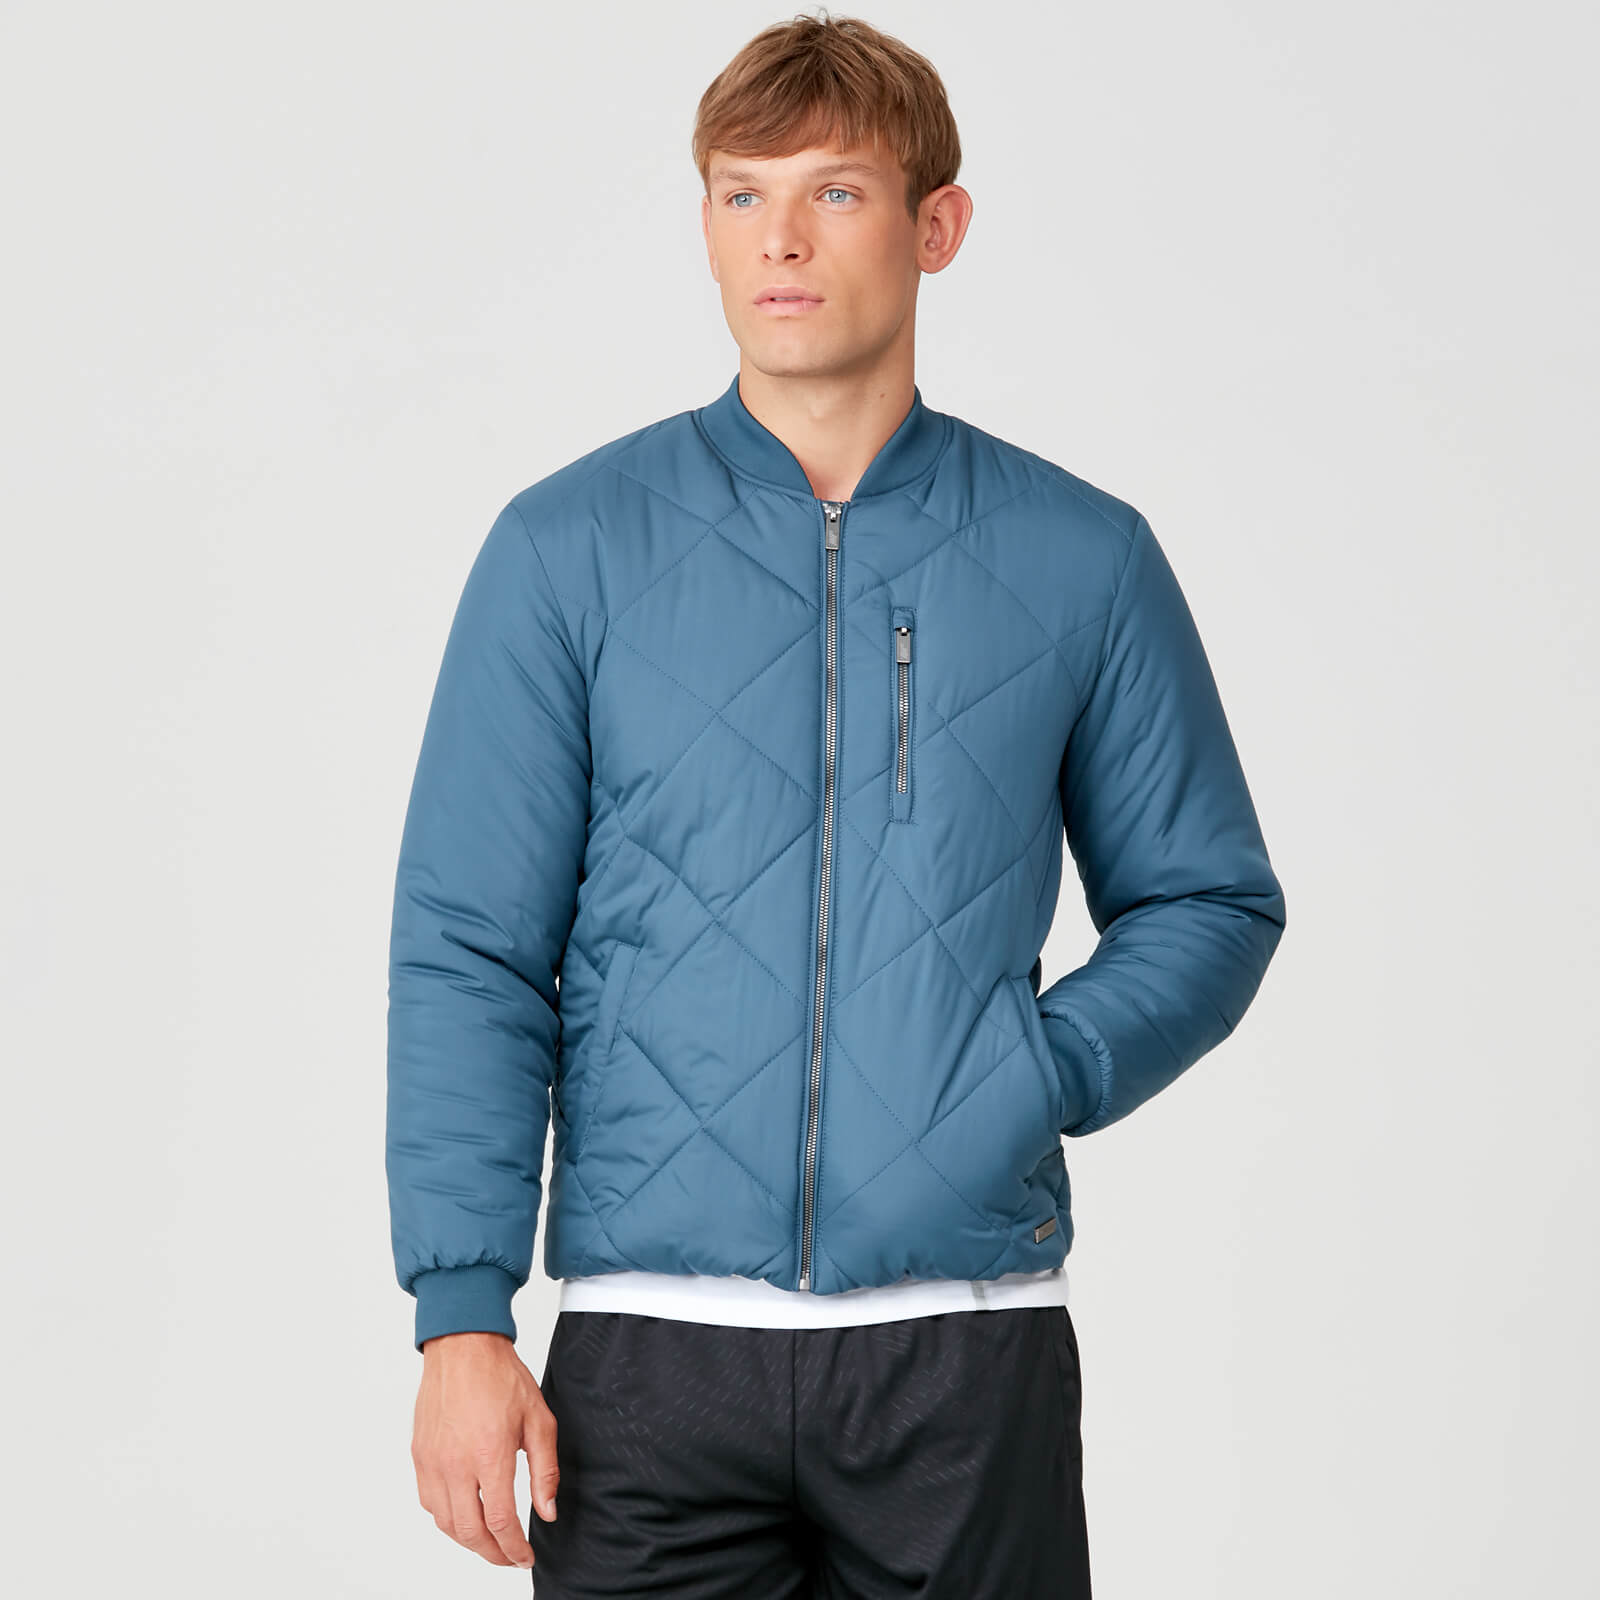 Myprotein Pro-Tech Quilted Bomber - S